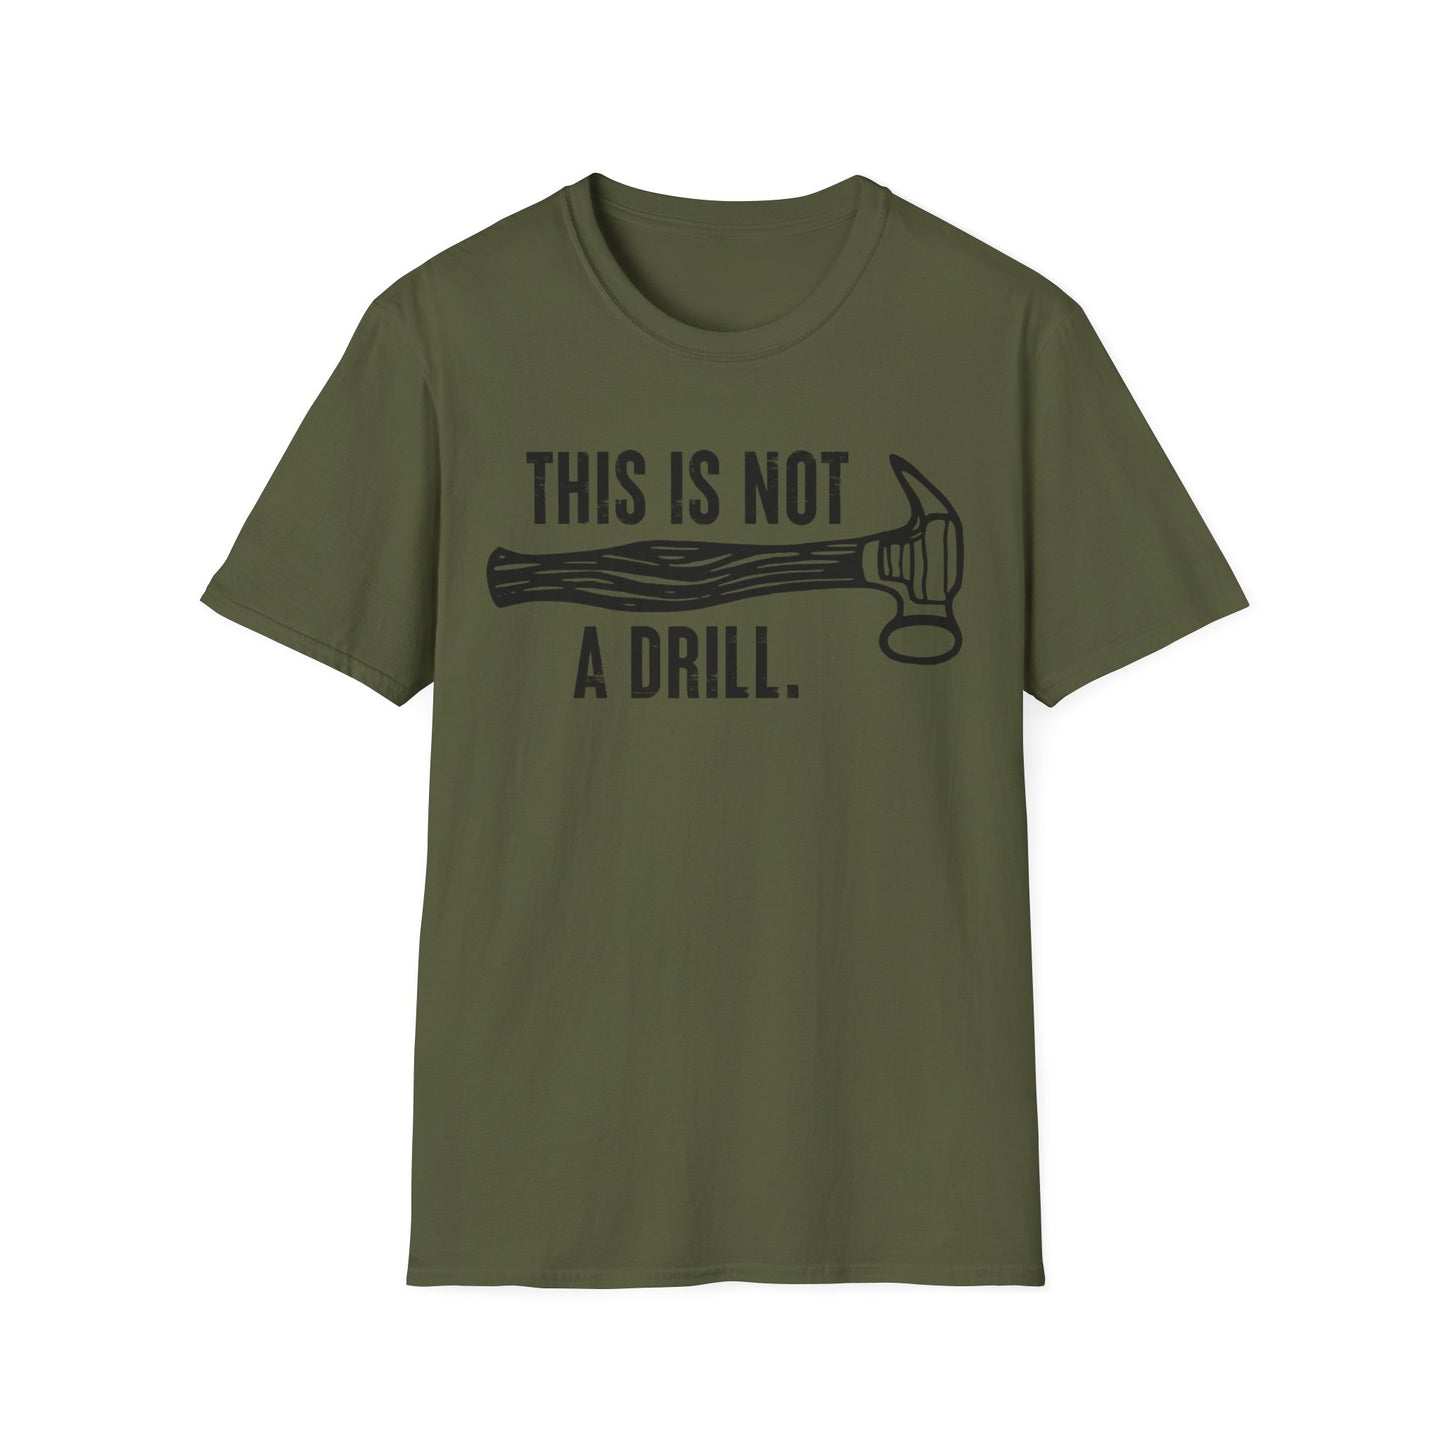 "This Is Not A Drill' Unisex Softstyle T-Shirt